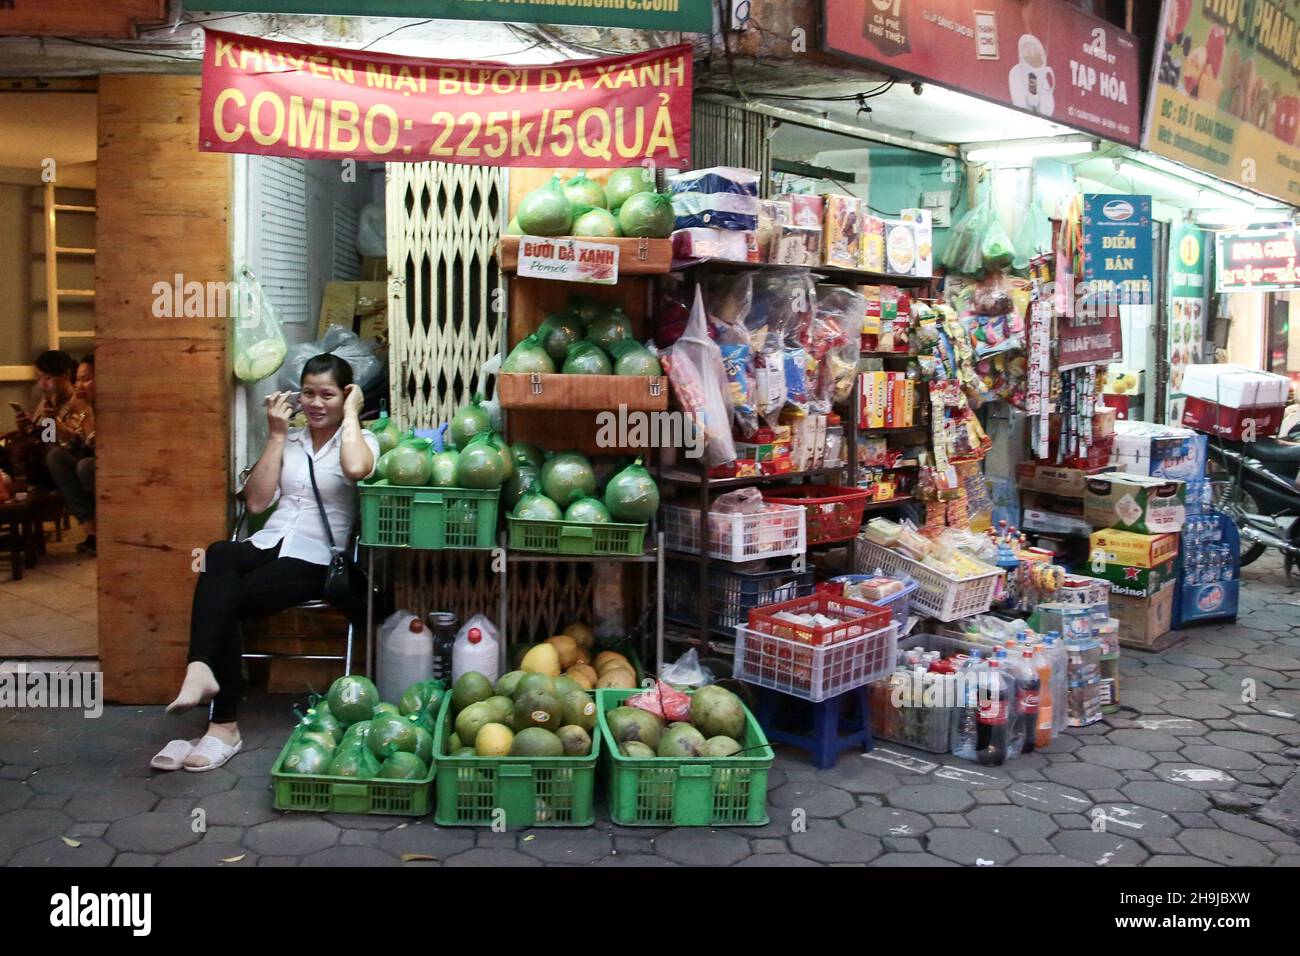 A fruit store on the streets of Hanoi in Vietnam. From a series of travel photos taken in Vietnam and Cambodia. Stock Photo